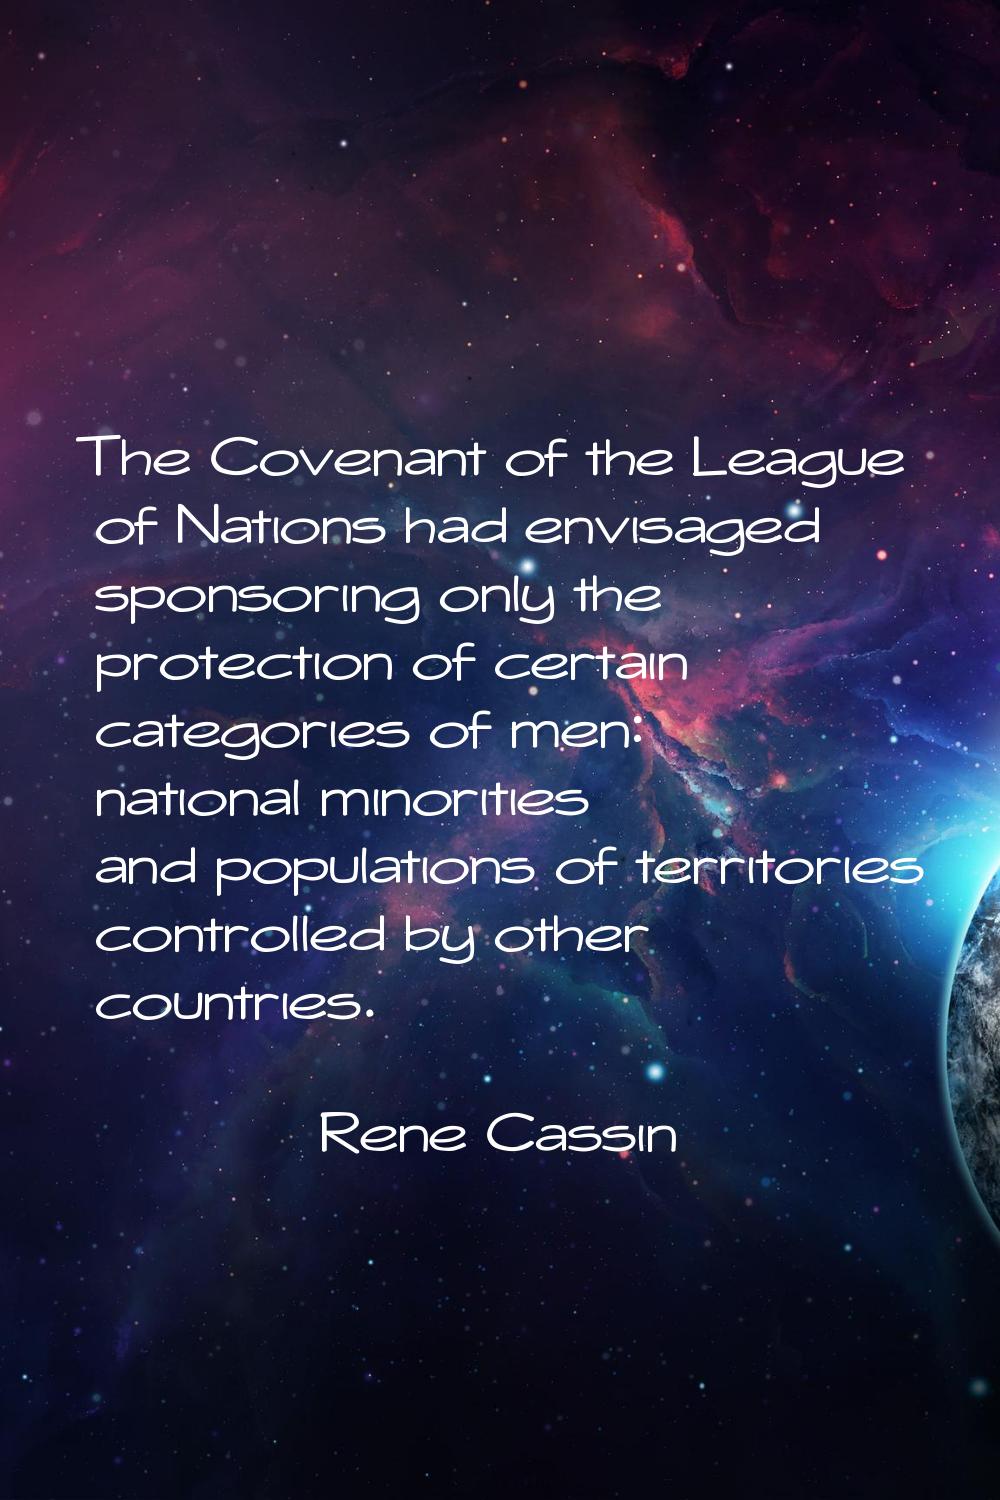 The Covenant of the League of Nations had envisaged sponsoring only the protection of certain categ